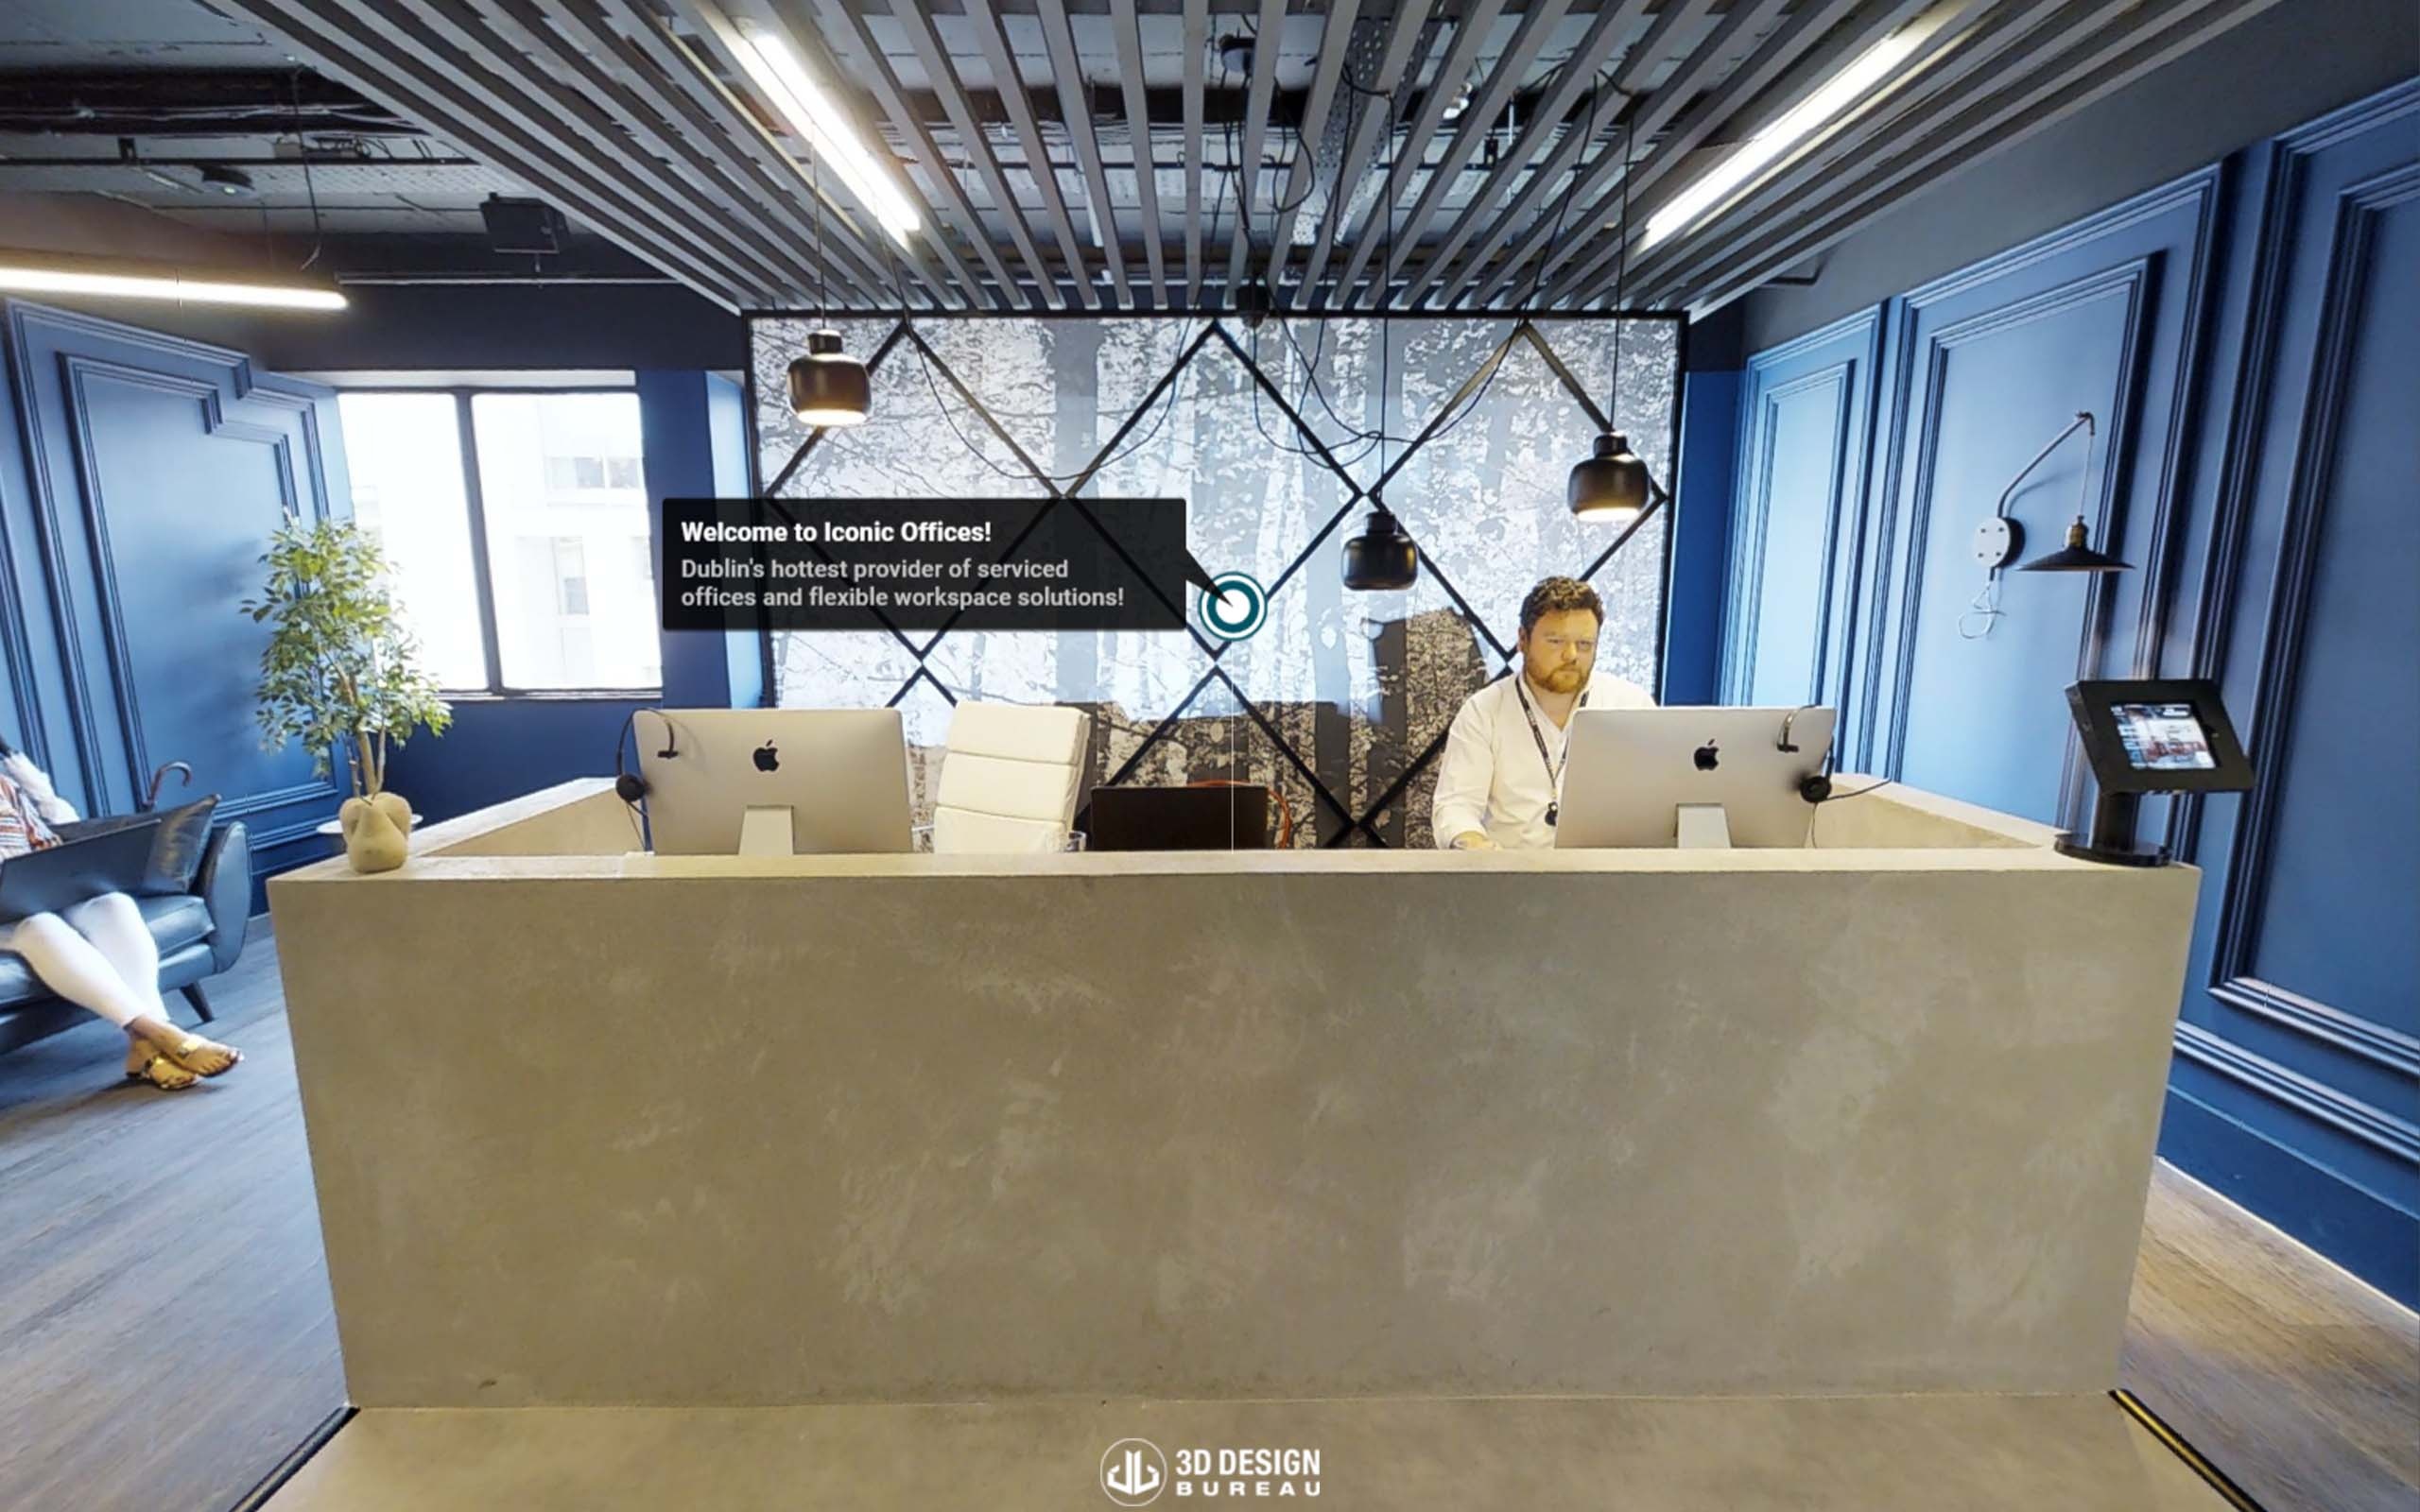 matterport virtual tour of iconic office